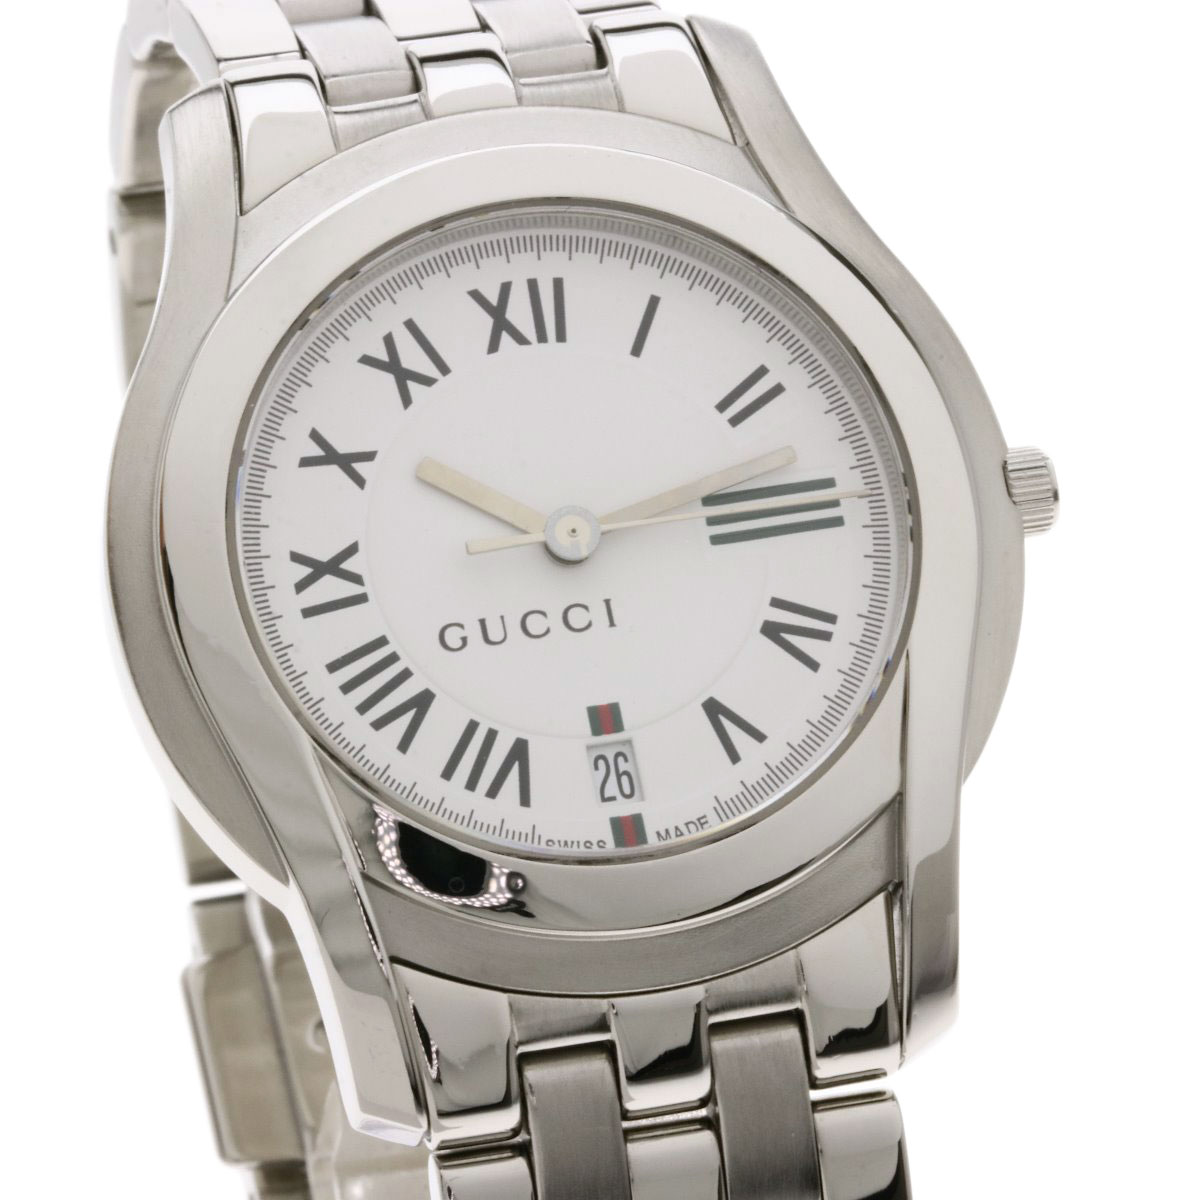 GUCCI Round face Watches 5500M Stainless Steel/Stainless Steel mens | eBay